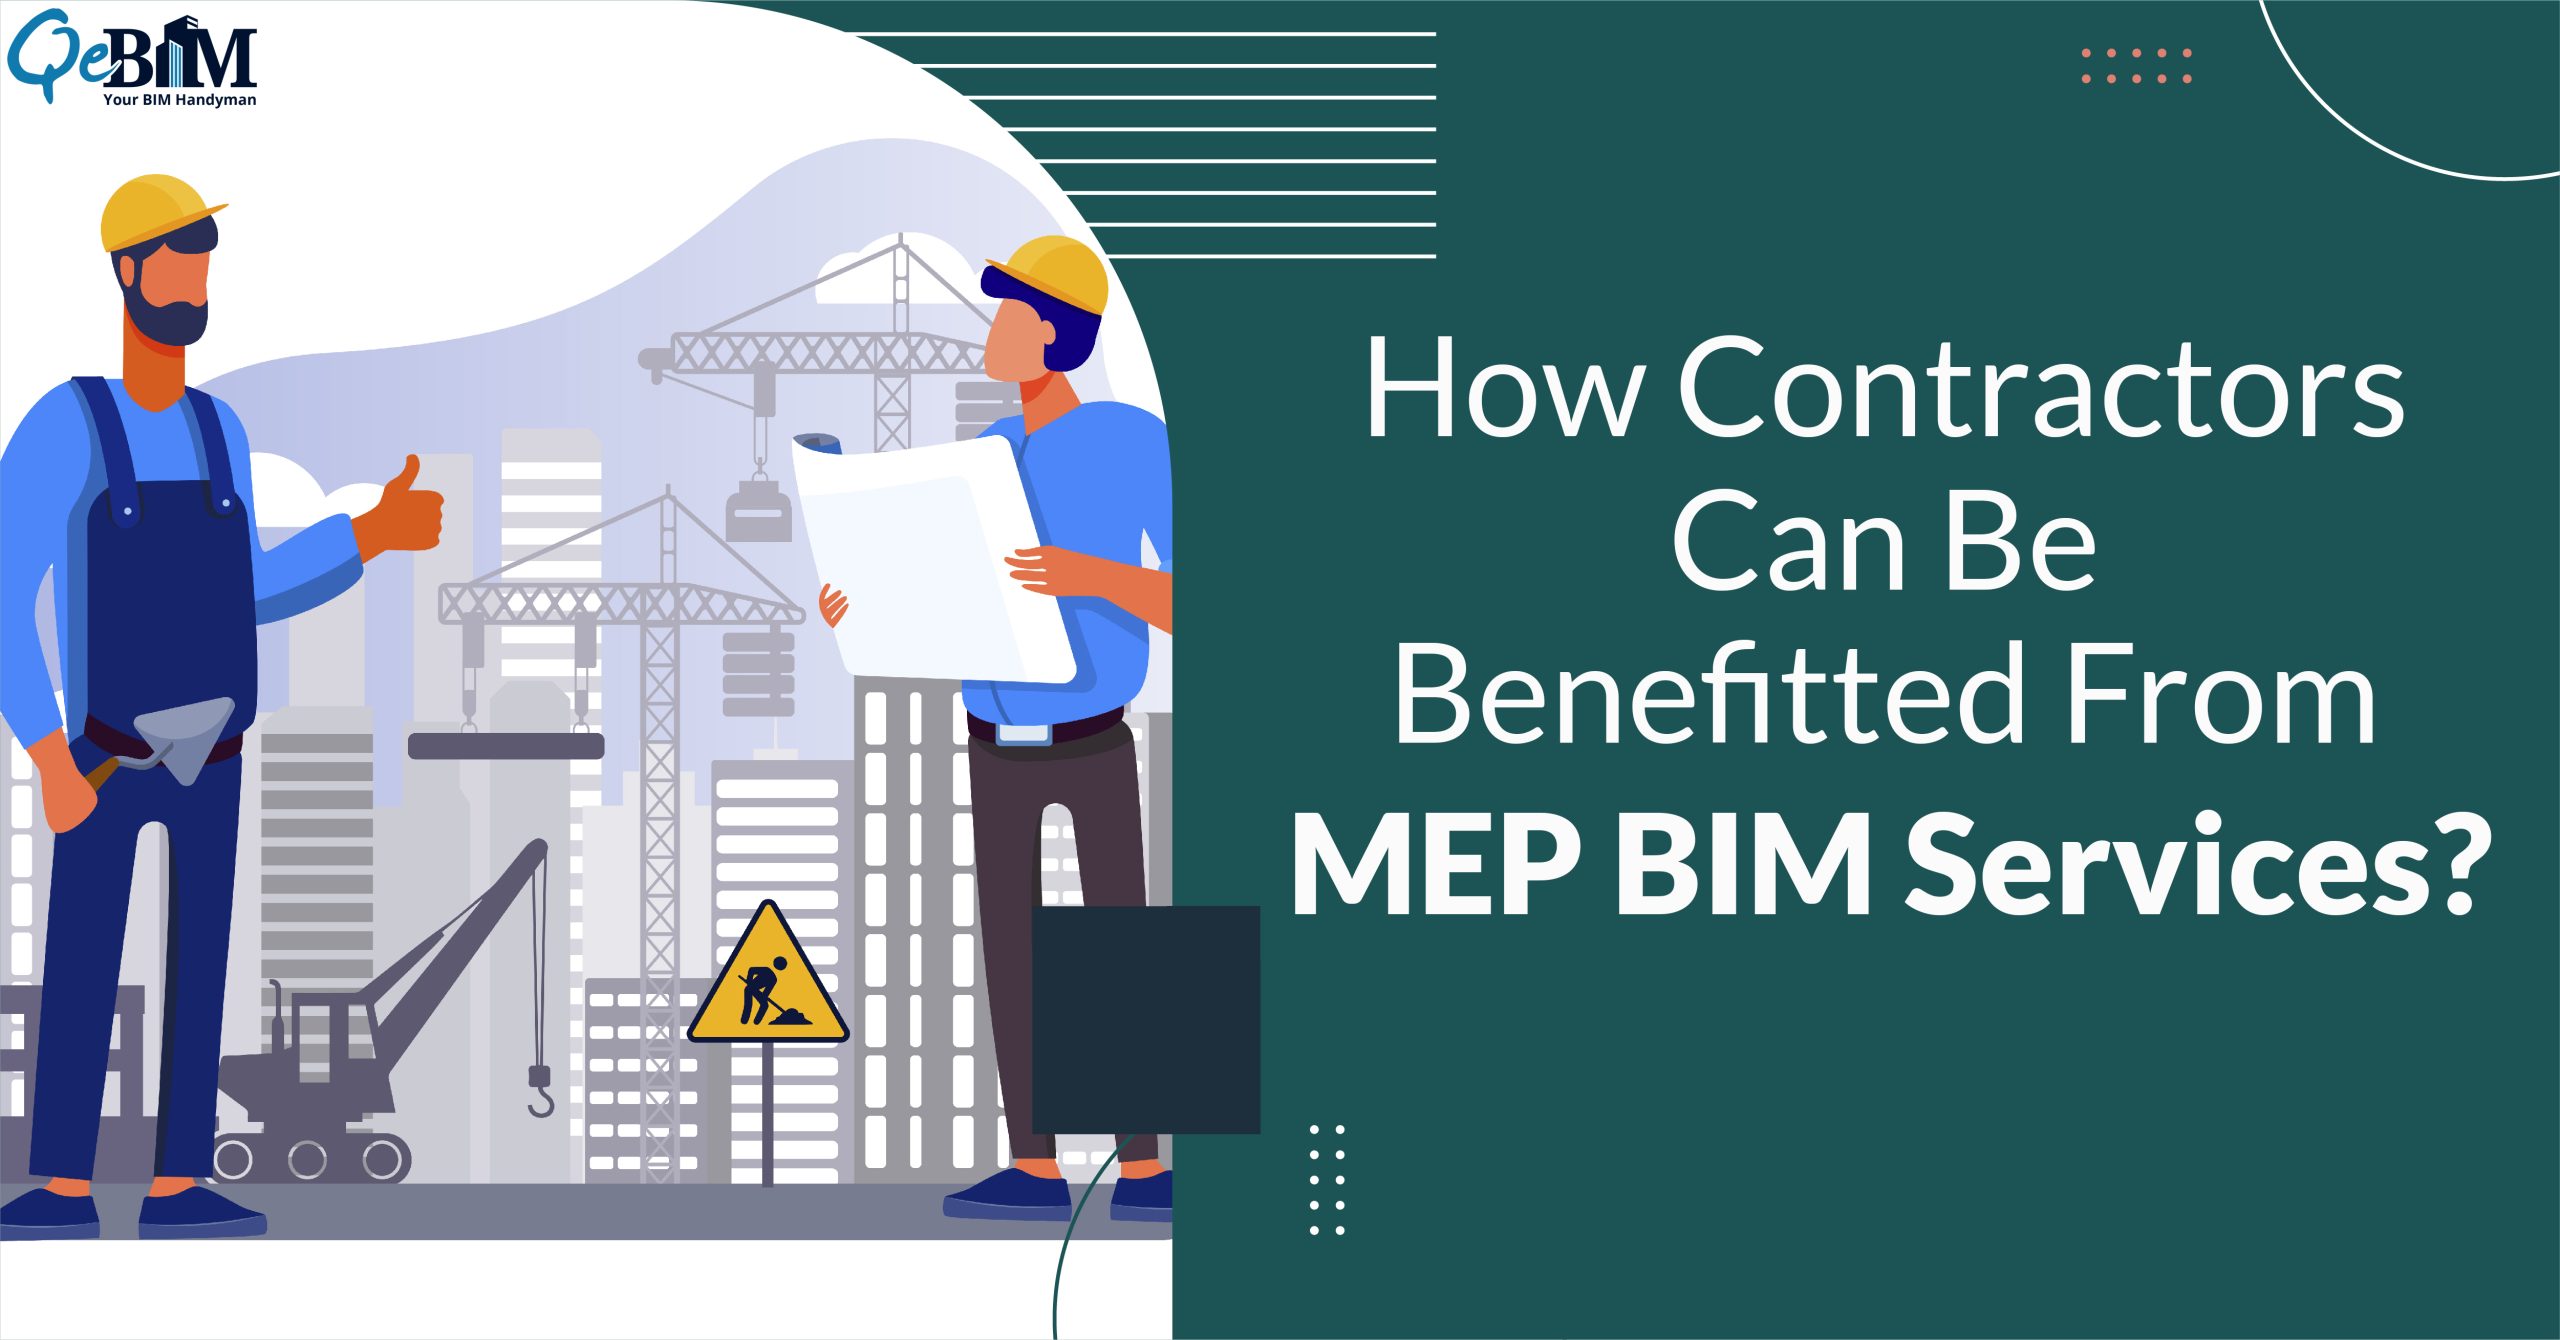 How Contractors Can Be Benefitted From MEP BIM Services?